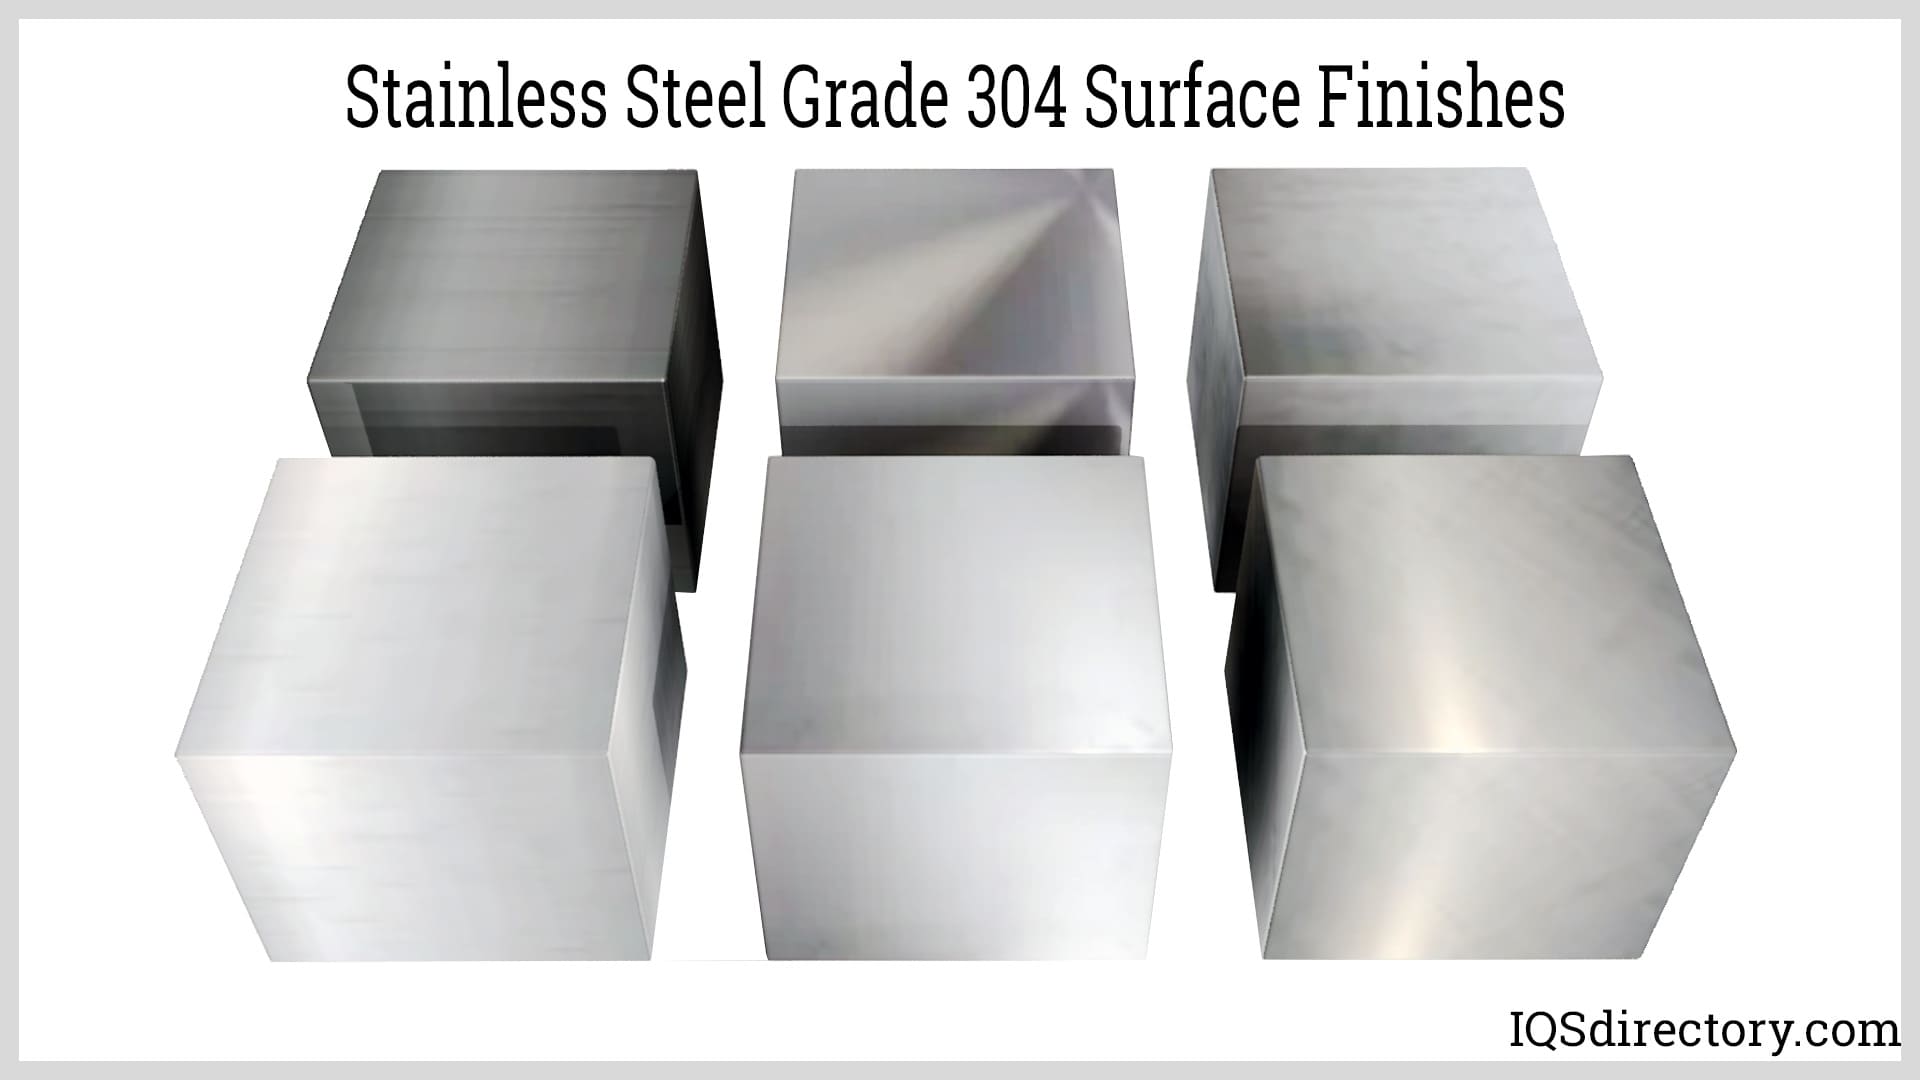 Stainless Steel Grade 304 Surface Finishes